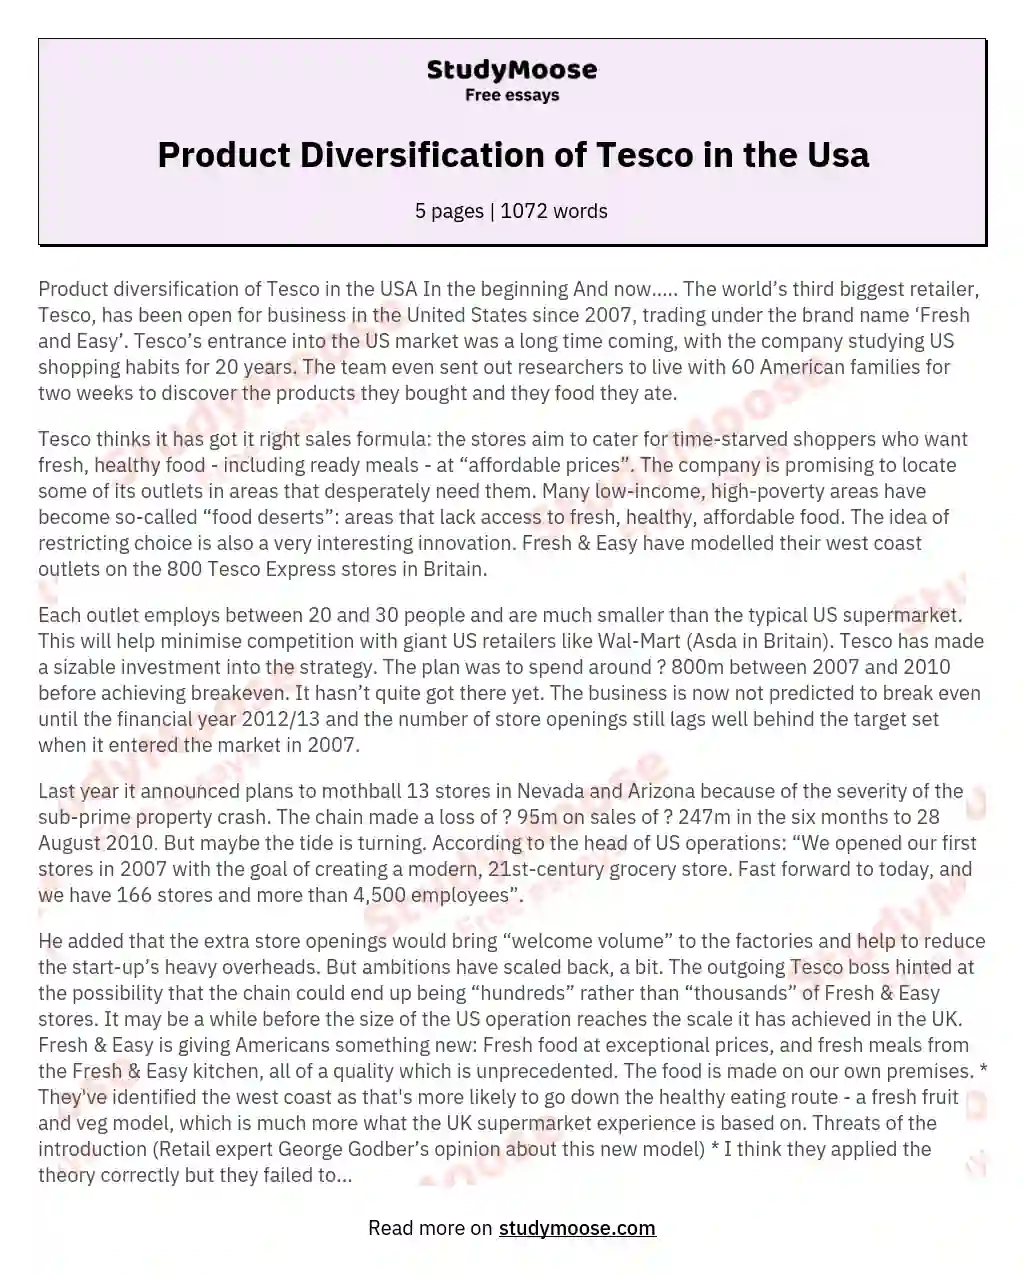 Product Diversification of Tesco in the Usa essay